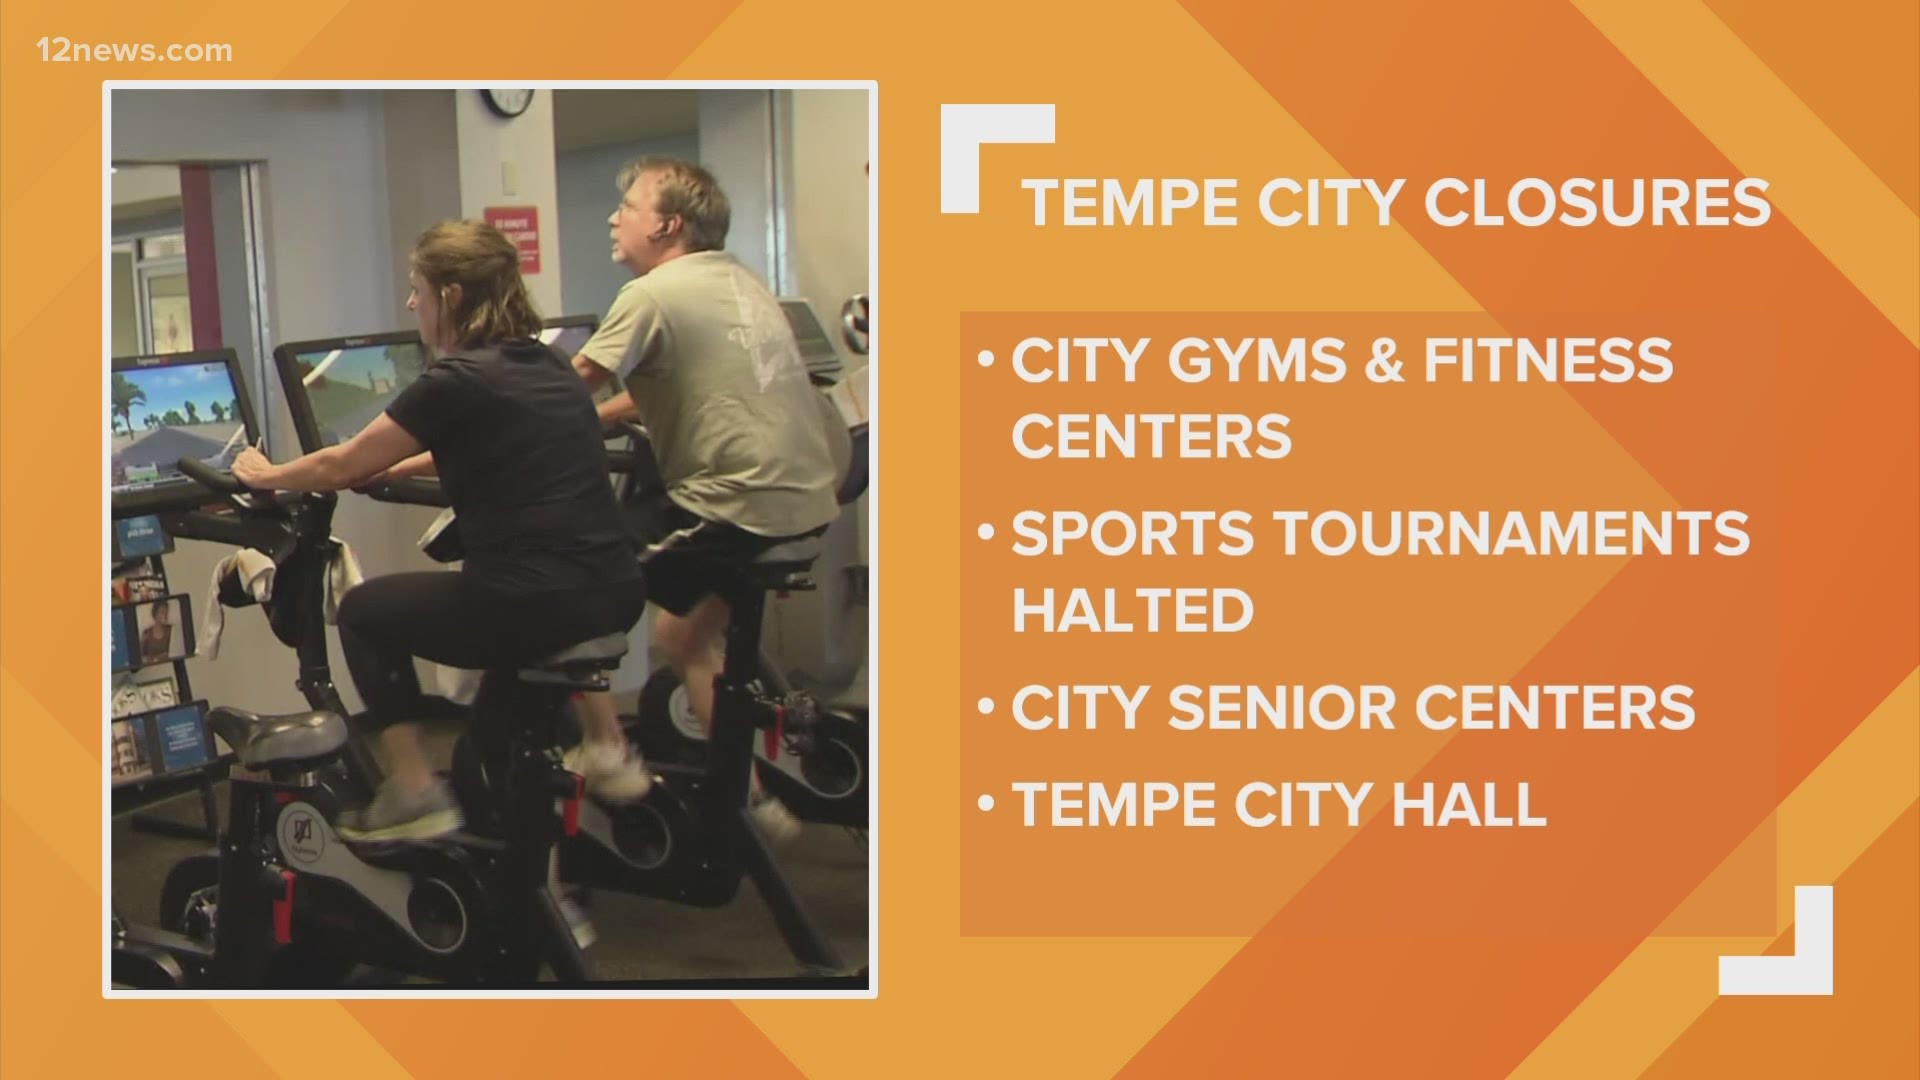 The city of Tempe is again taking steps to help prevent the spread of COVID-19 by re-closing a number of services. Team 12's Matt Yurus has the latest.